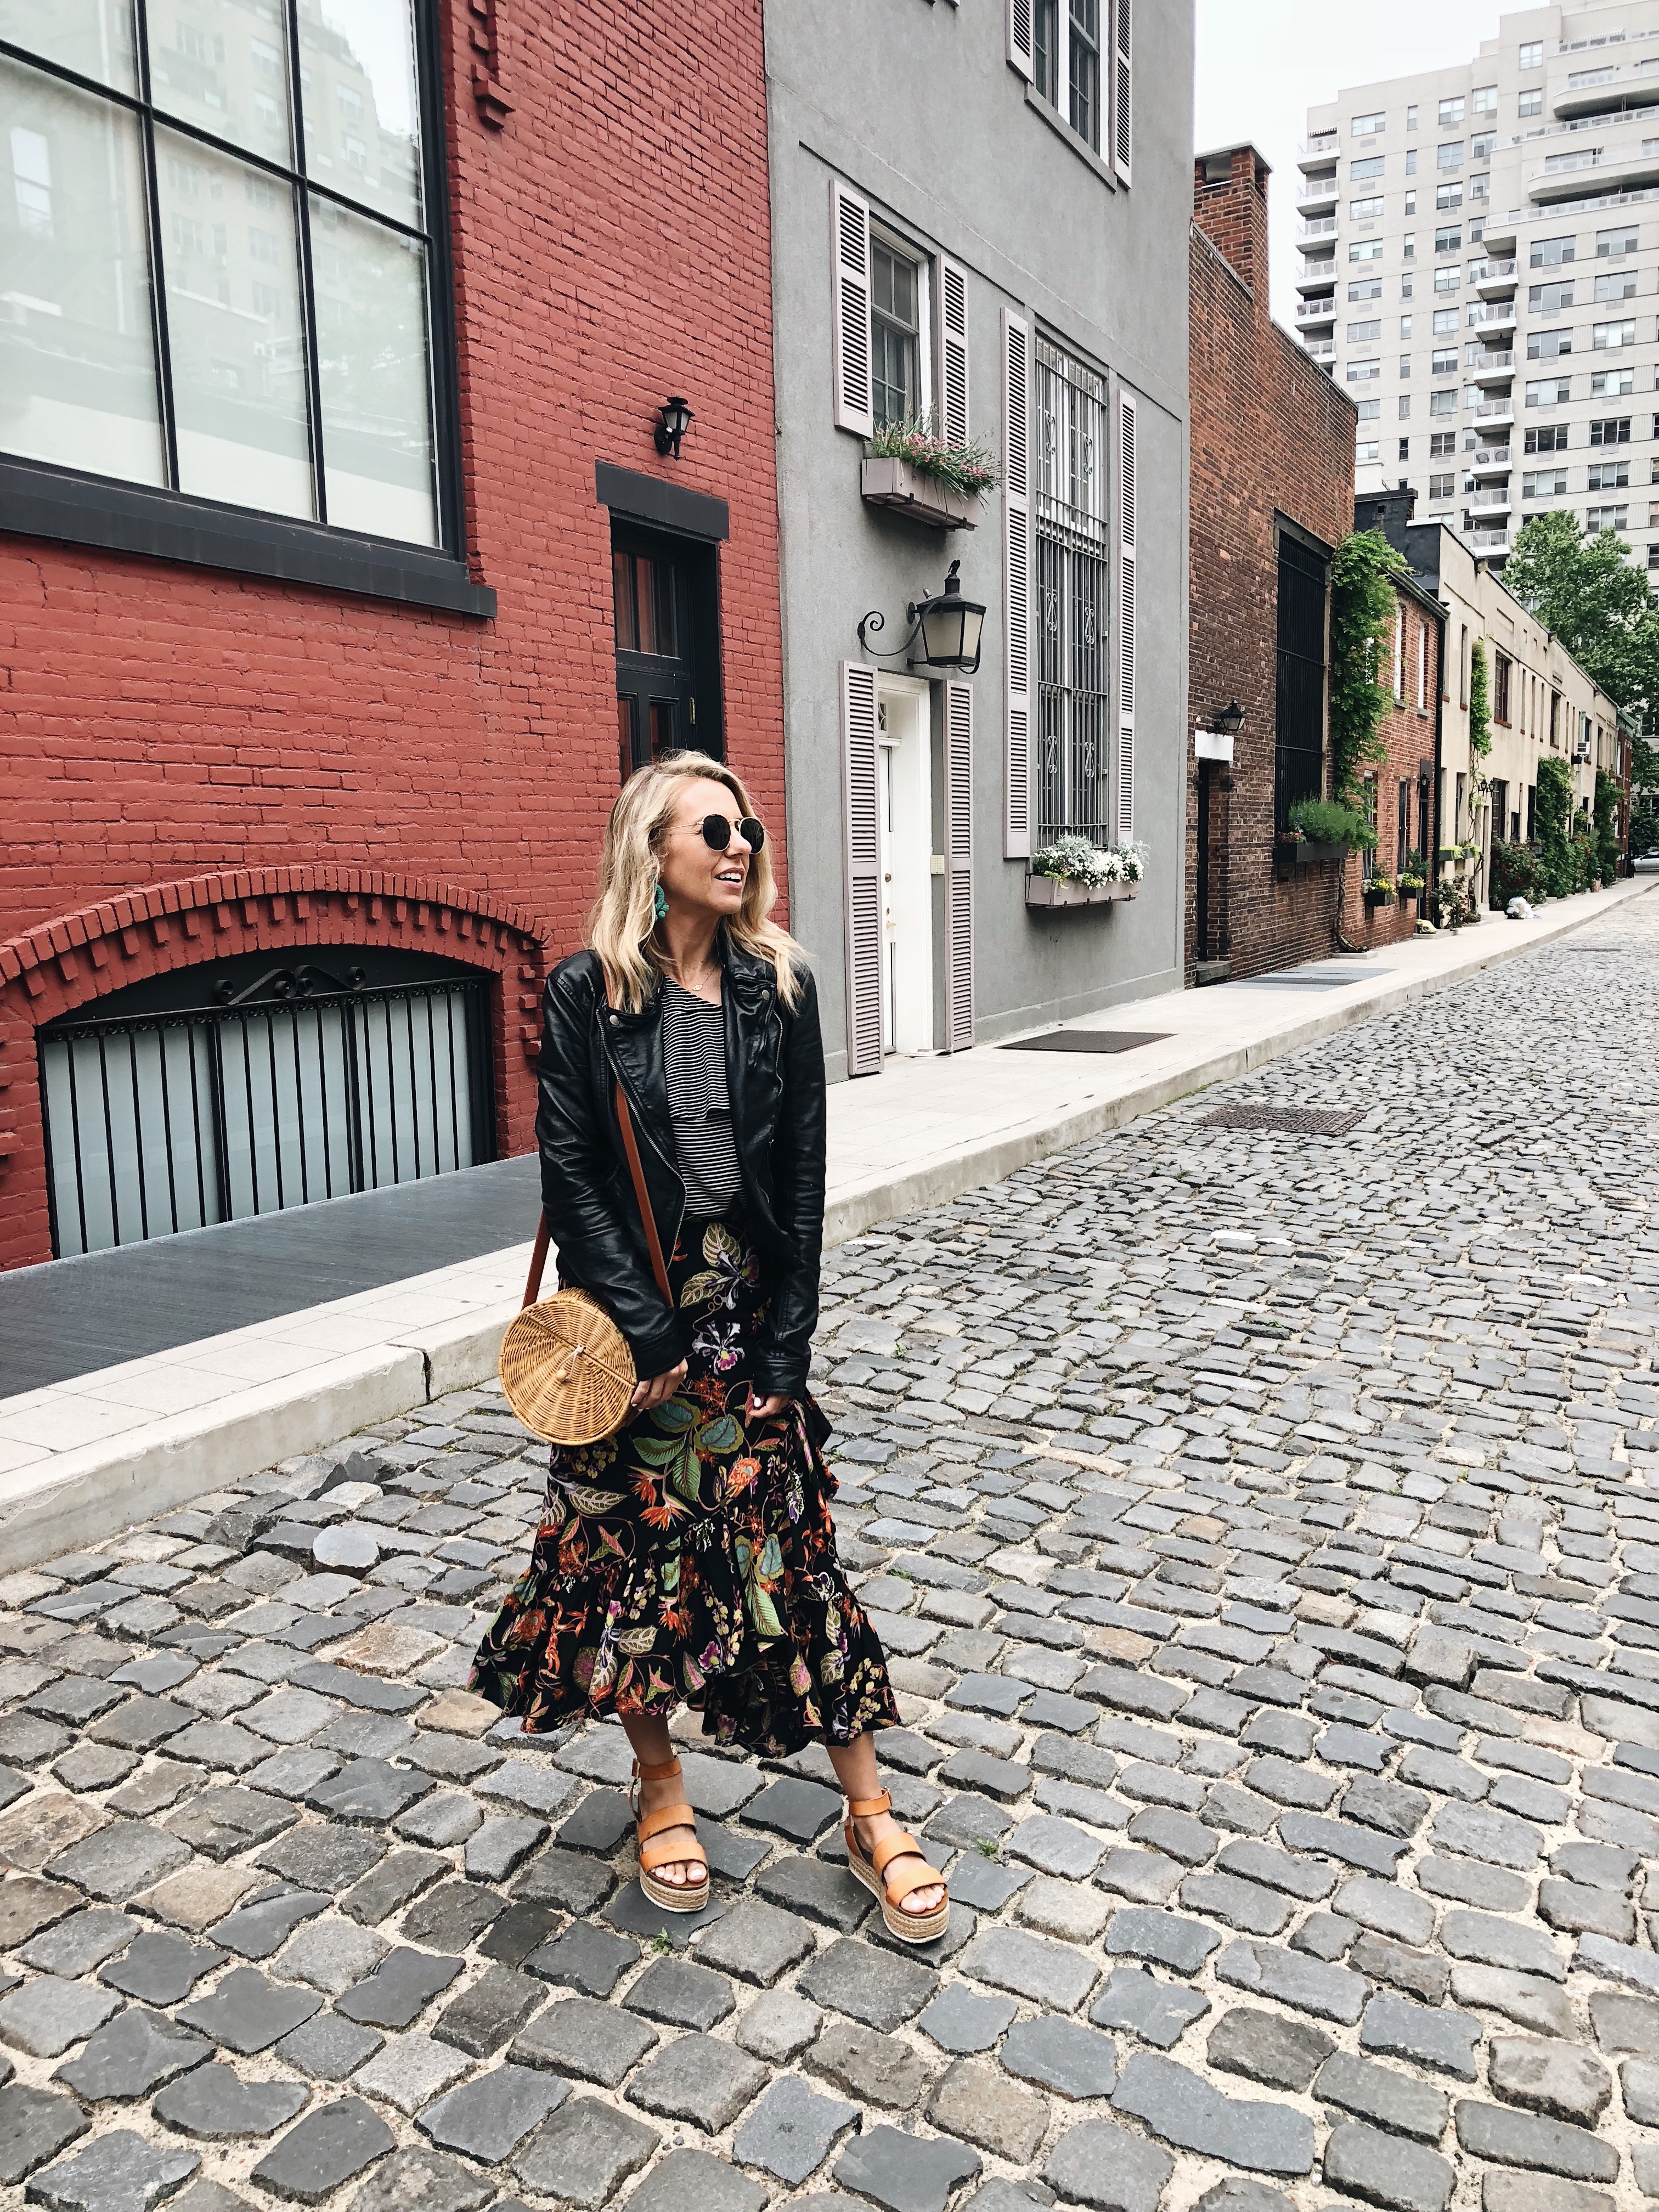 ADVENTURES IN NEW YORK- Jaclyn De Leon Style + ruffle floral midi skirt + striped top + faux leather jacket + straw crossbody handbag +platform espadrille sandals + casual street style + what to wear this spring + h&m style